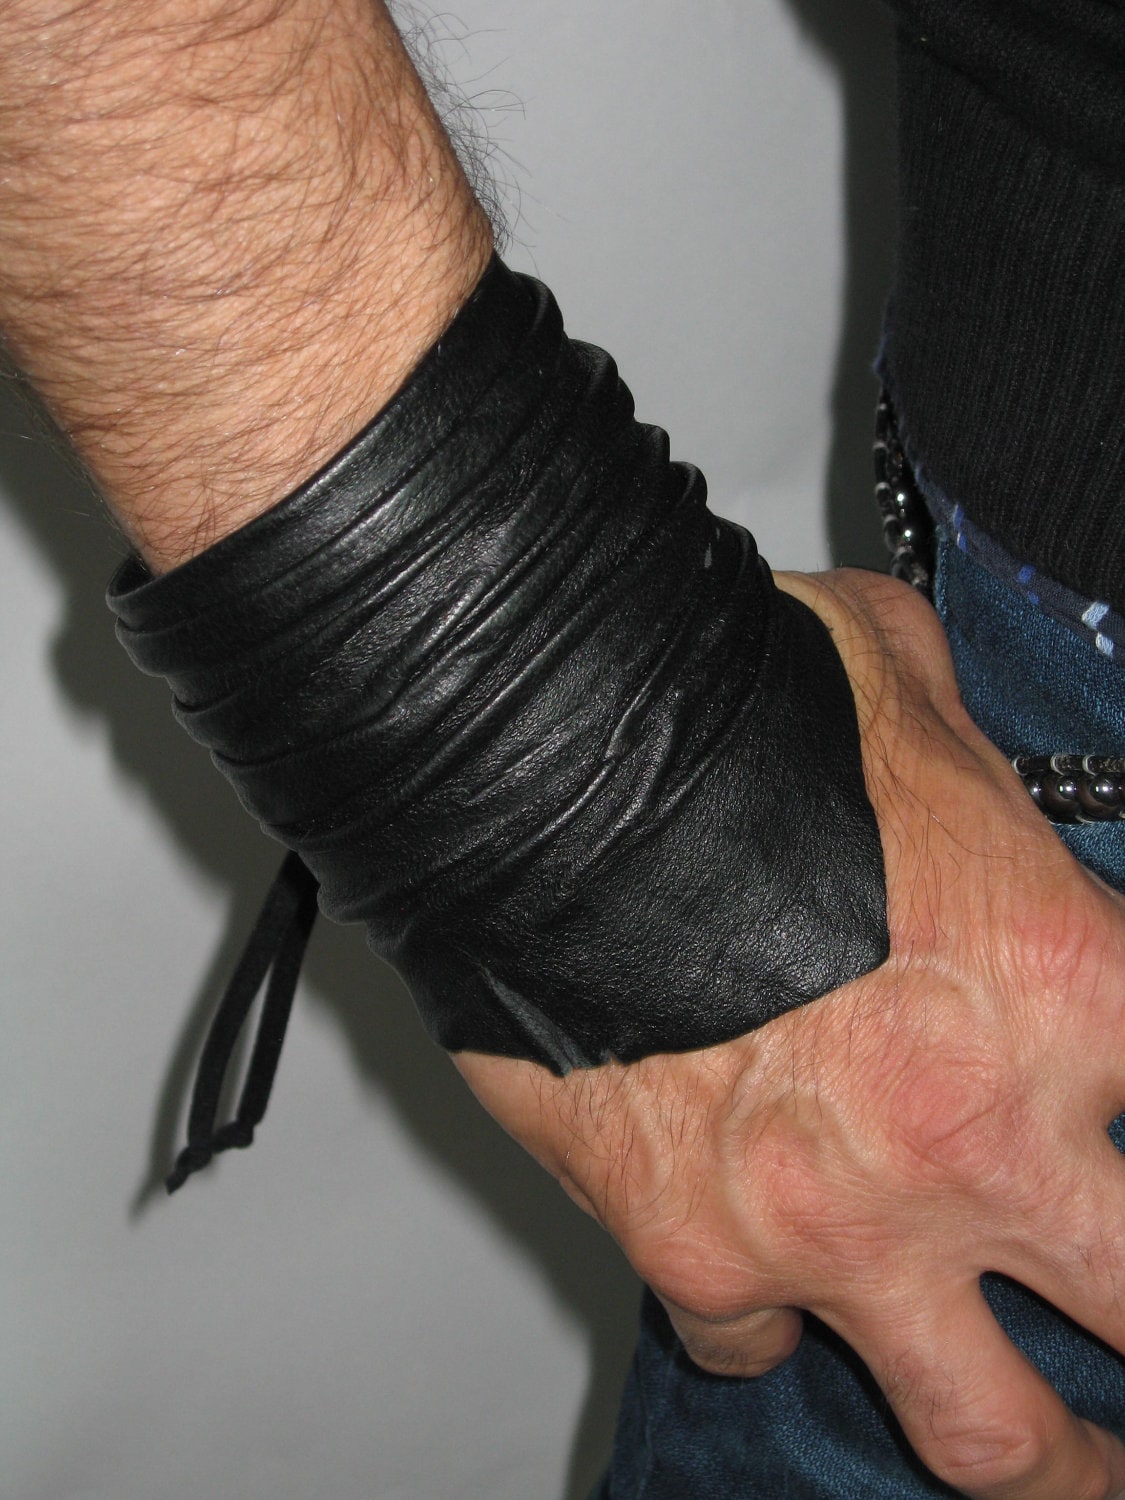 Sculpted Men's Leather Cuff Bracelet Leather Wrist Band